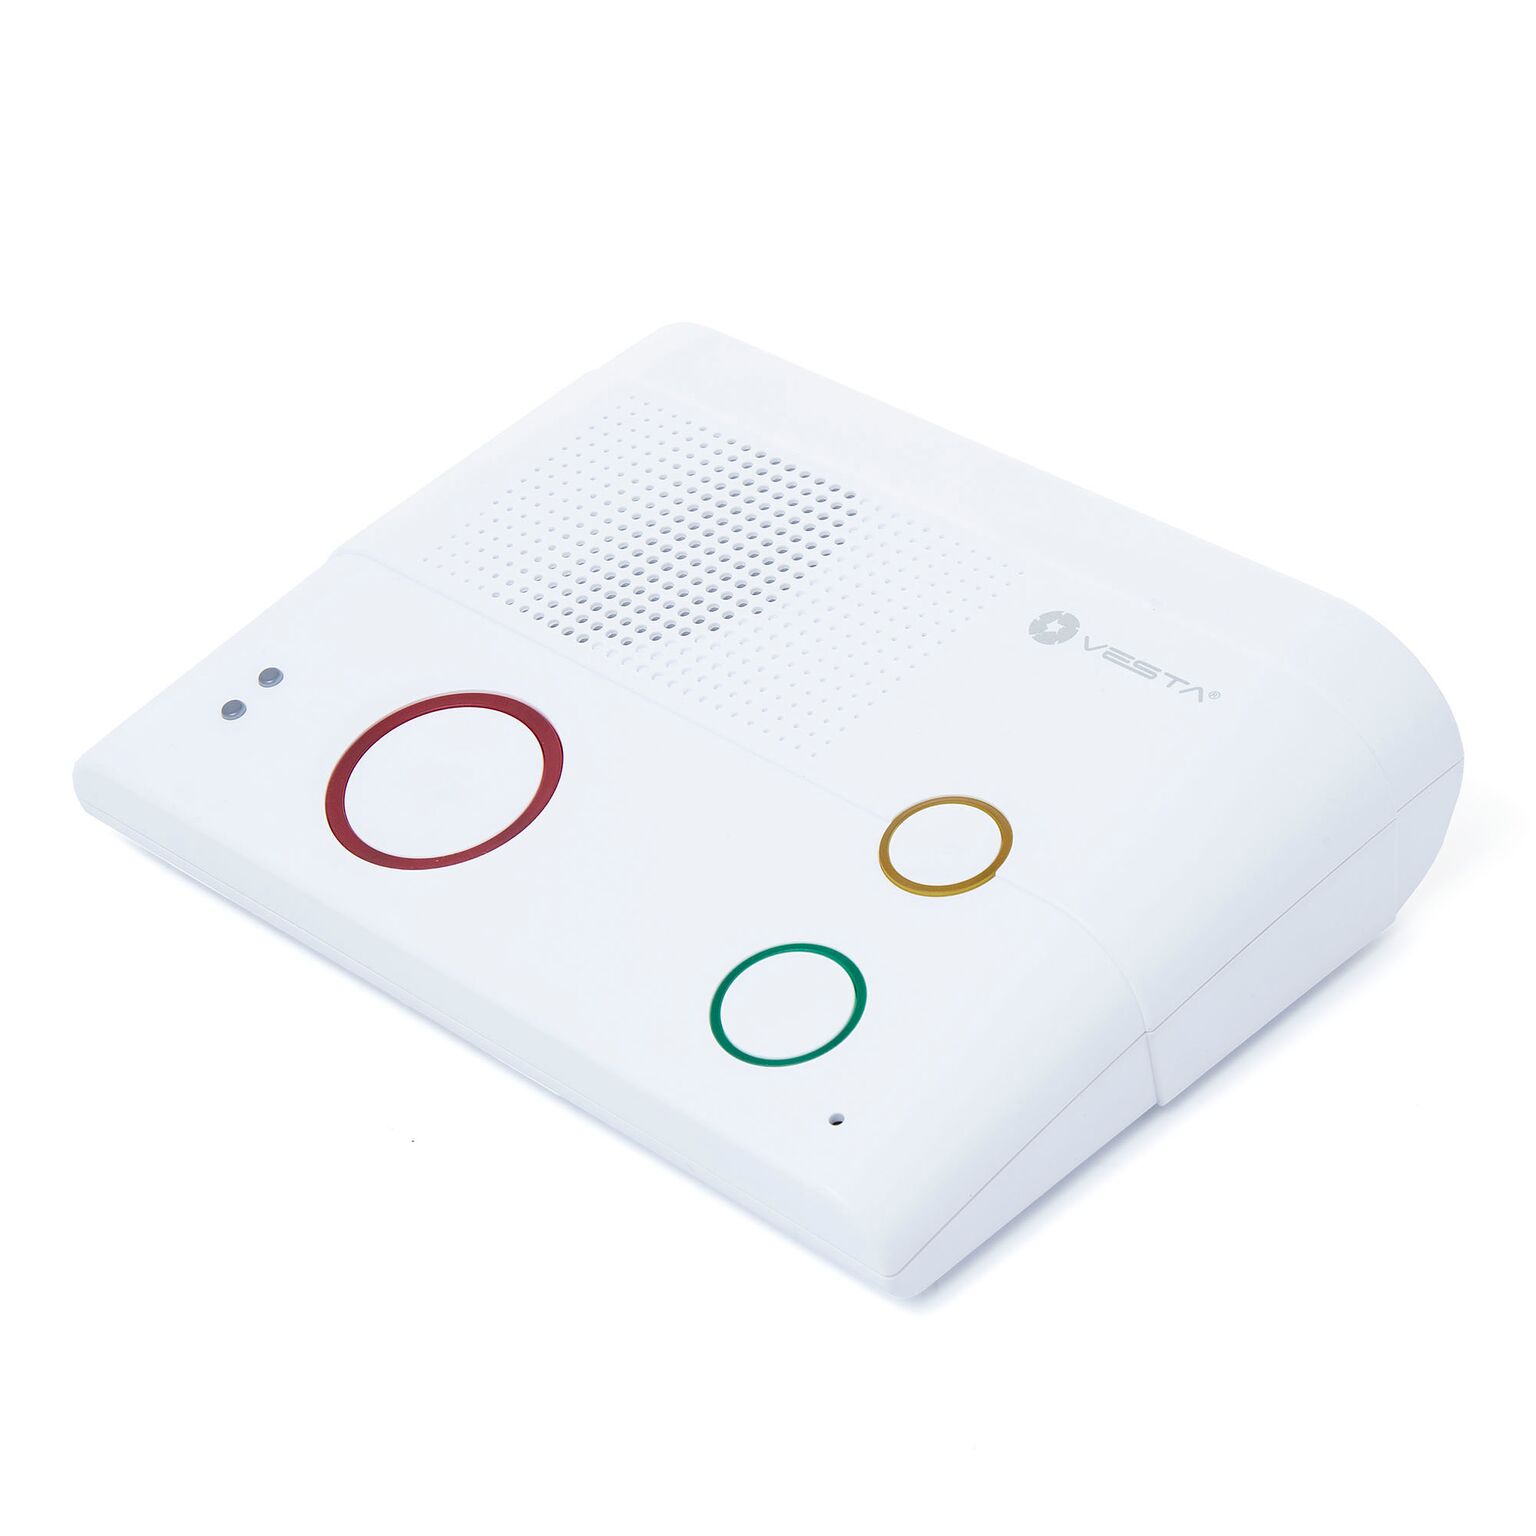 Suresafe Talksafe With 24-7 Connect Monitoring Alarm 2